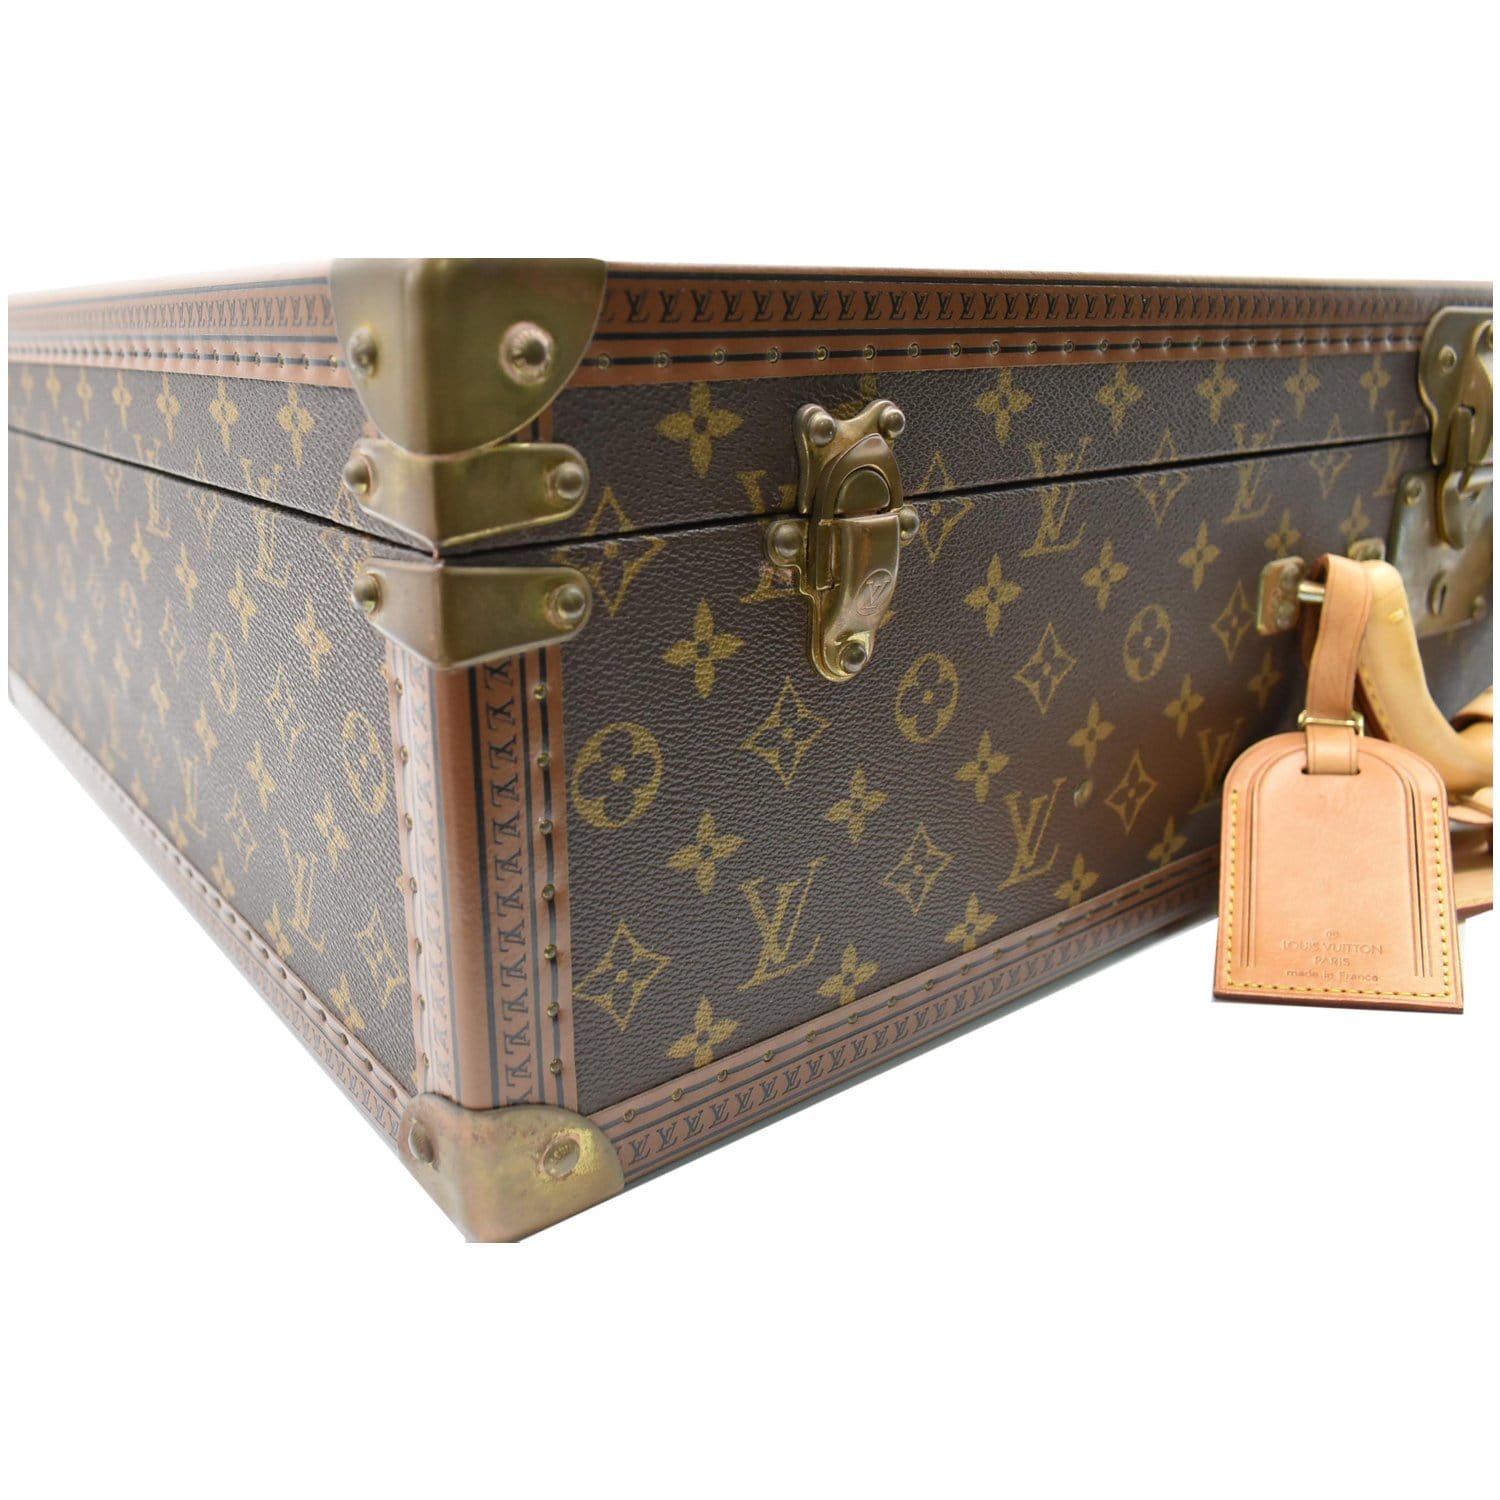 Sold at Auction: LOUIS VUITTON - Rigid suitcase model Bisten 70 in leather  and canvas monogram